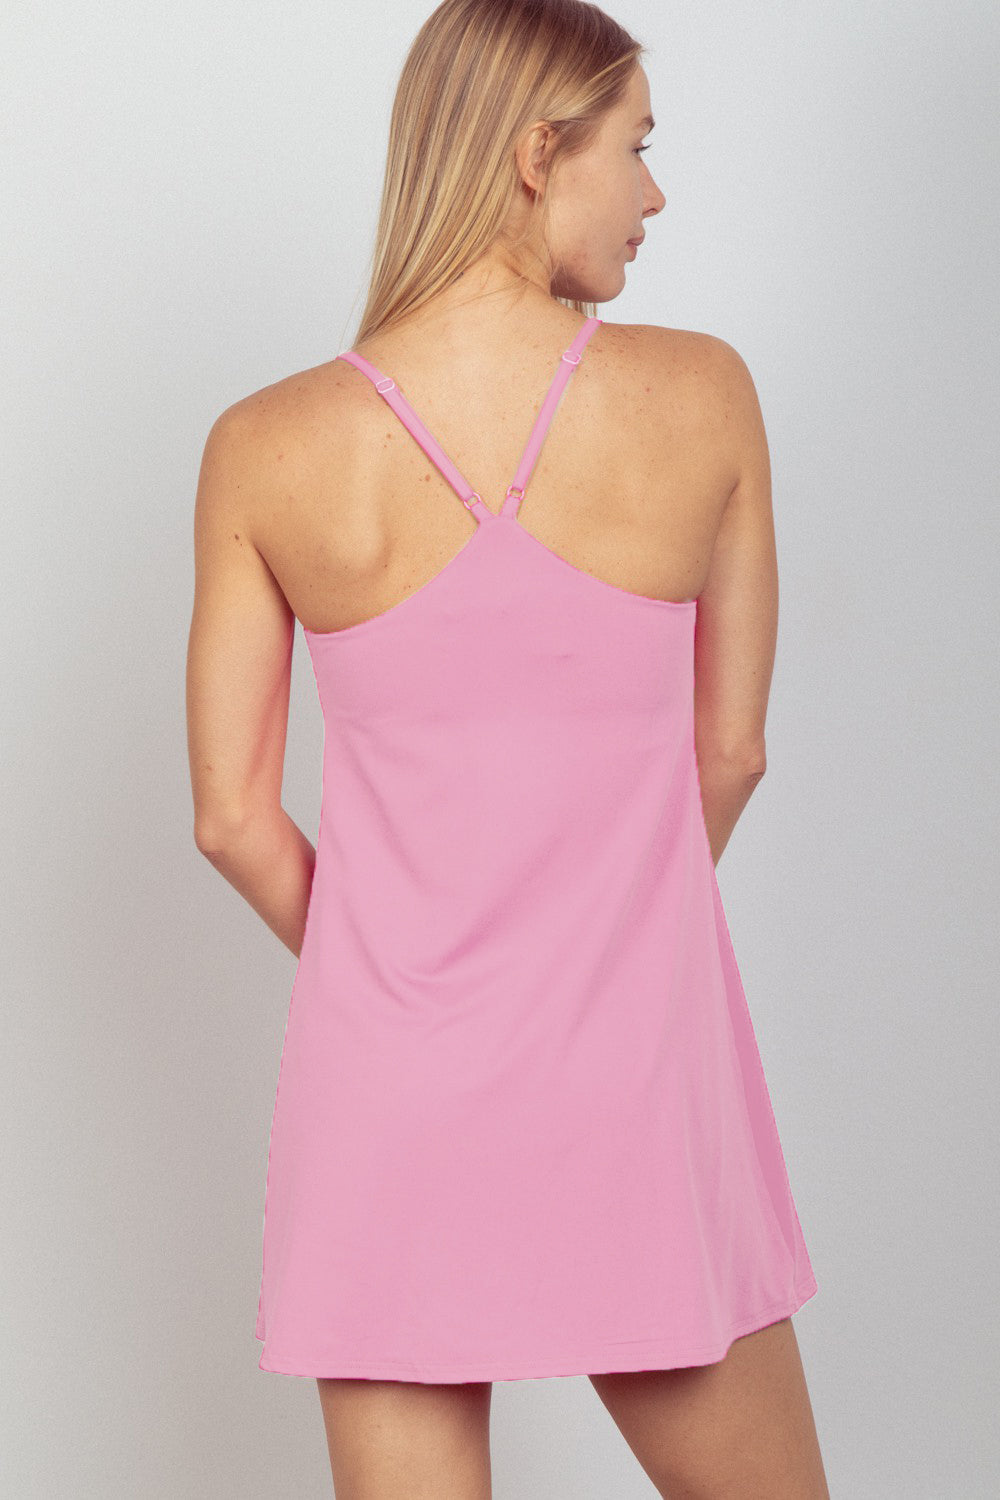 VERY J Sleeveless Active Tennis Dress with Unitard Liner Southern Soul Collectives